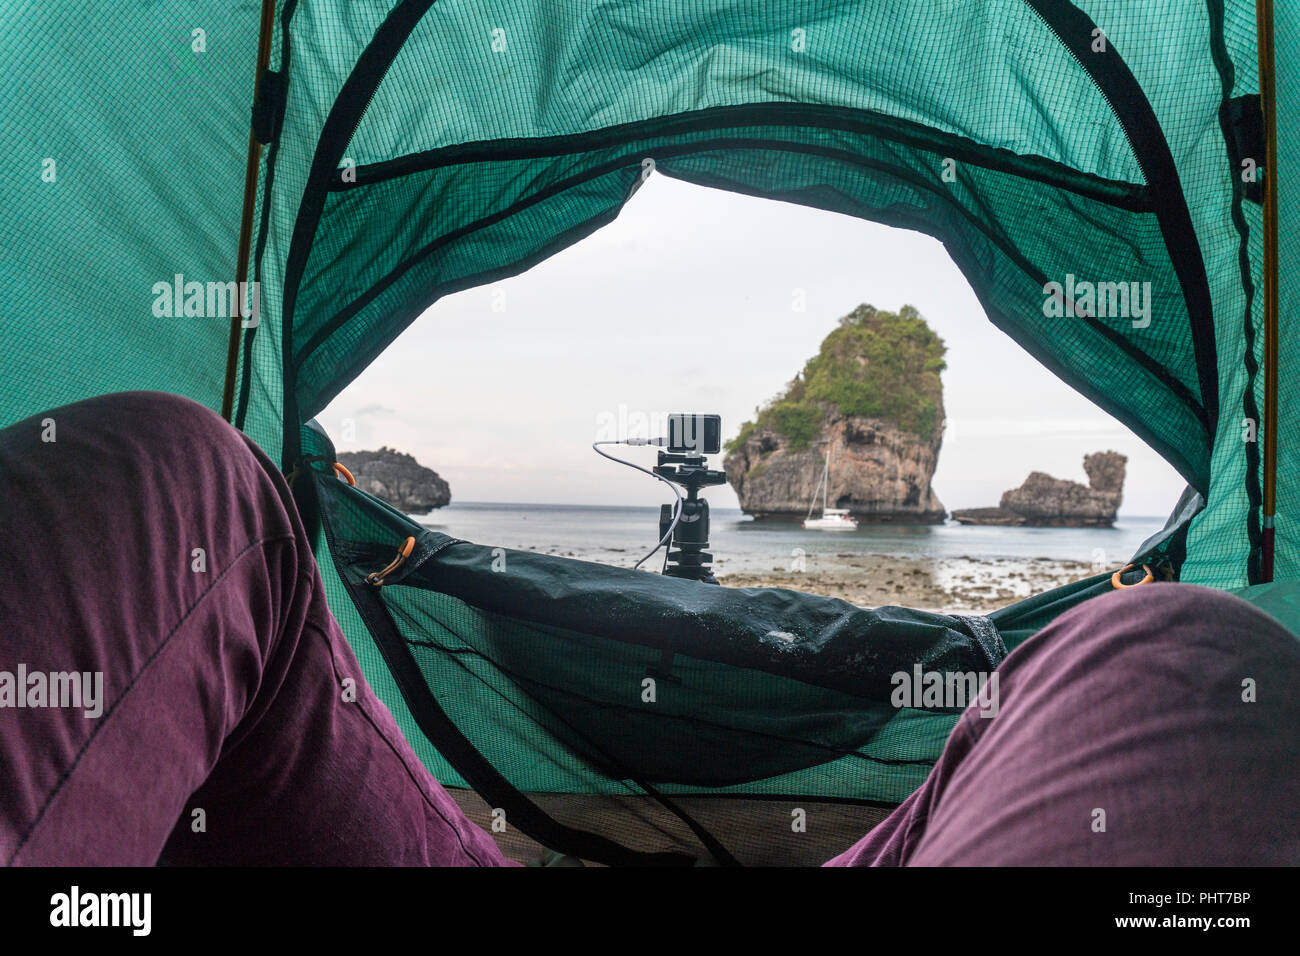 Lifestyle image with legs in purple jeans on foreground of POV view from a tent on the beach of the bay with rocks. Action Camera on tripod. Traveling filmmaker lifestyle. Stock Photo